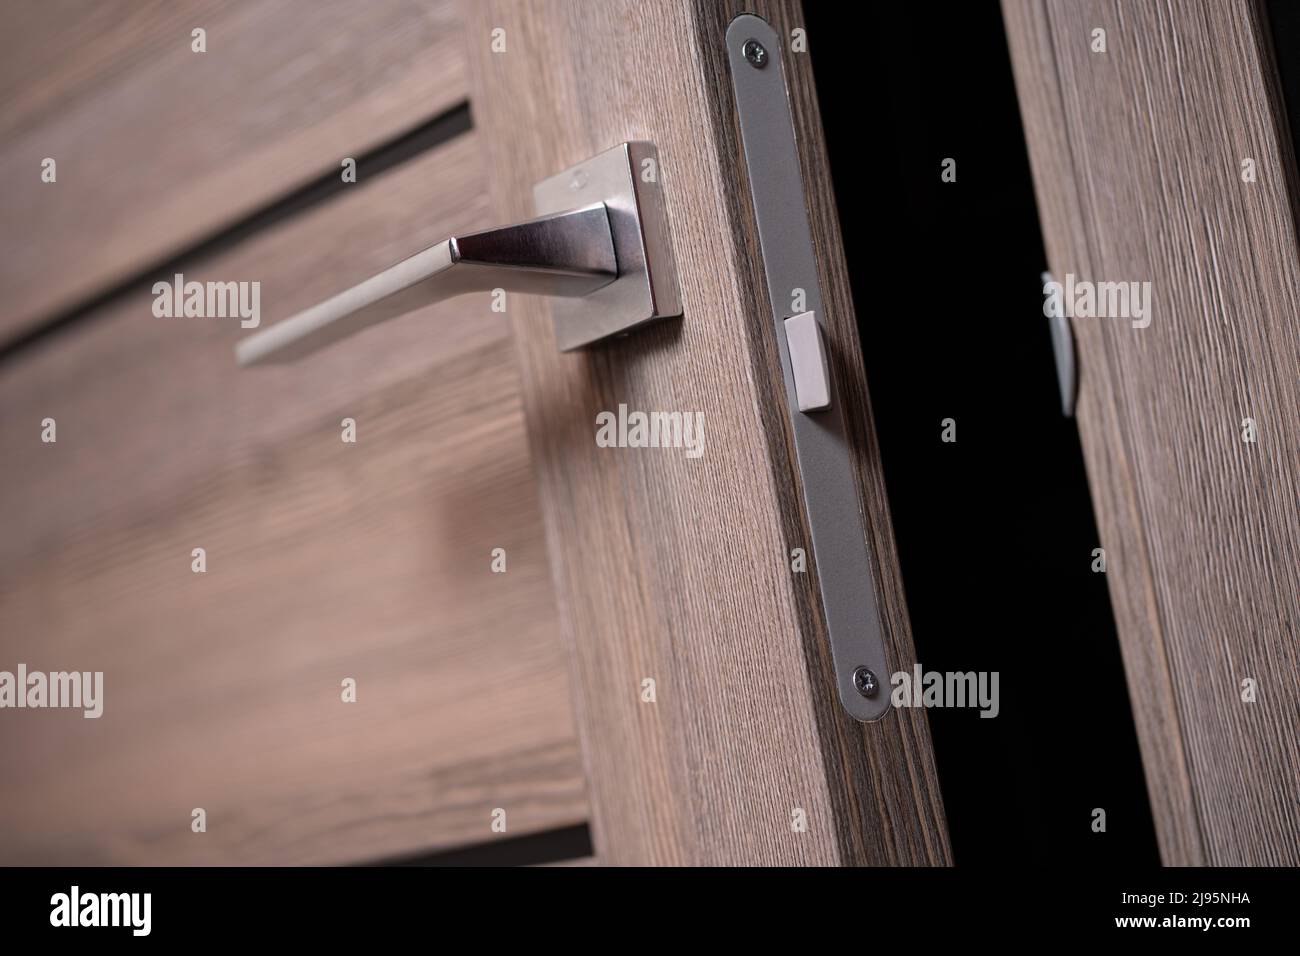 modern and secured metal door handle and latch detail Stock Photo